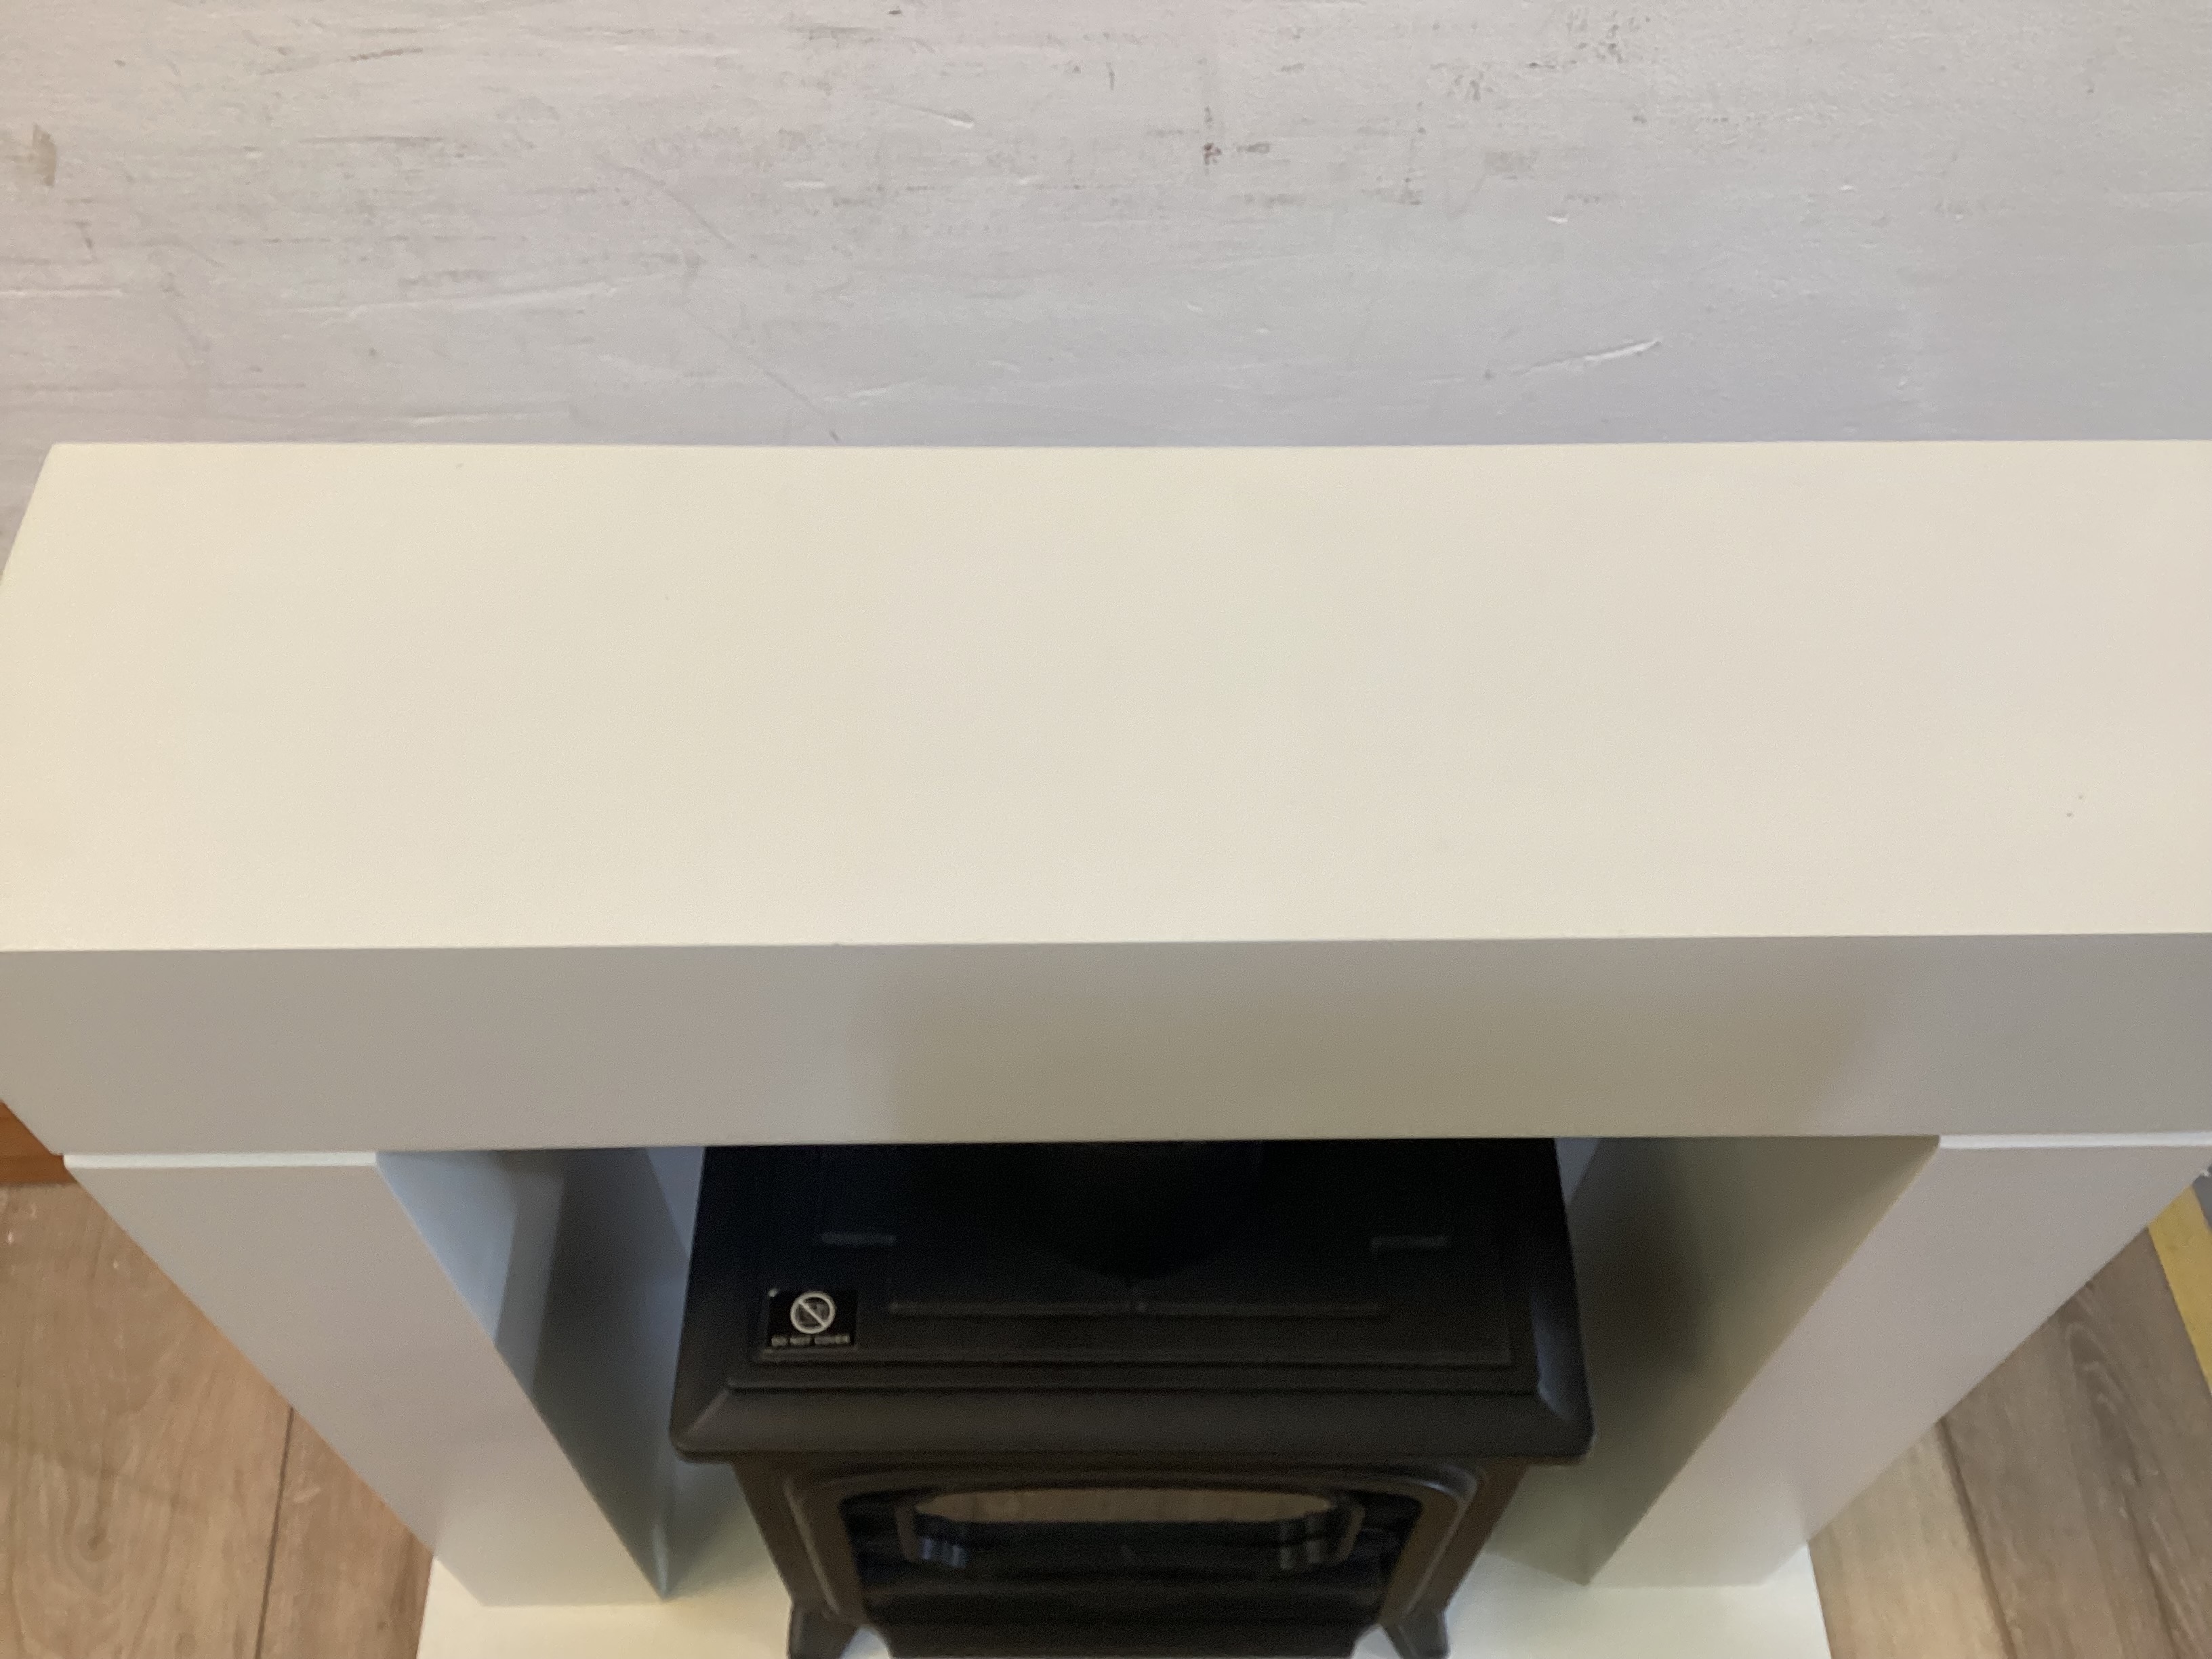 Electric Heater with Fire surround